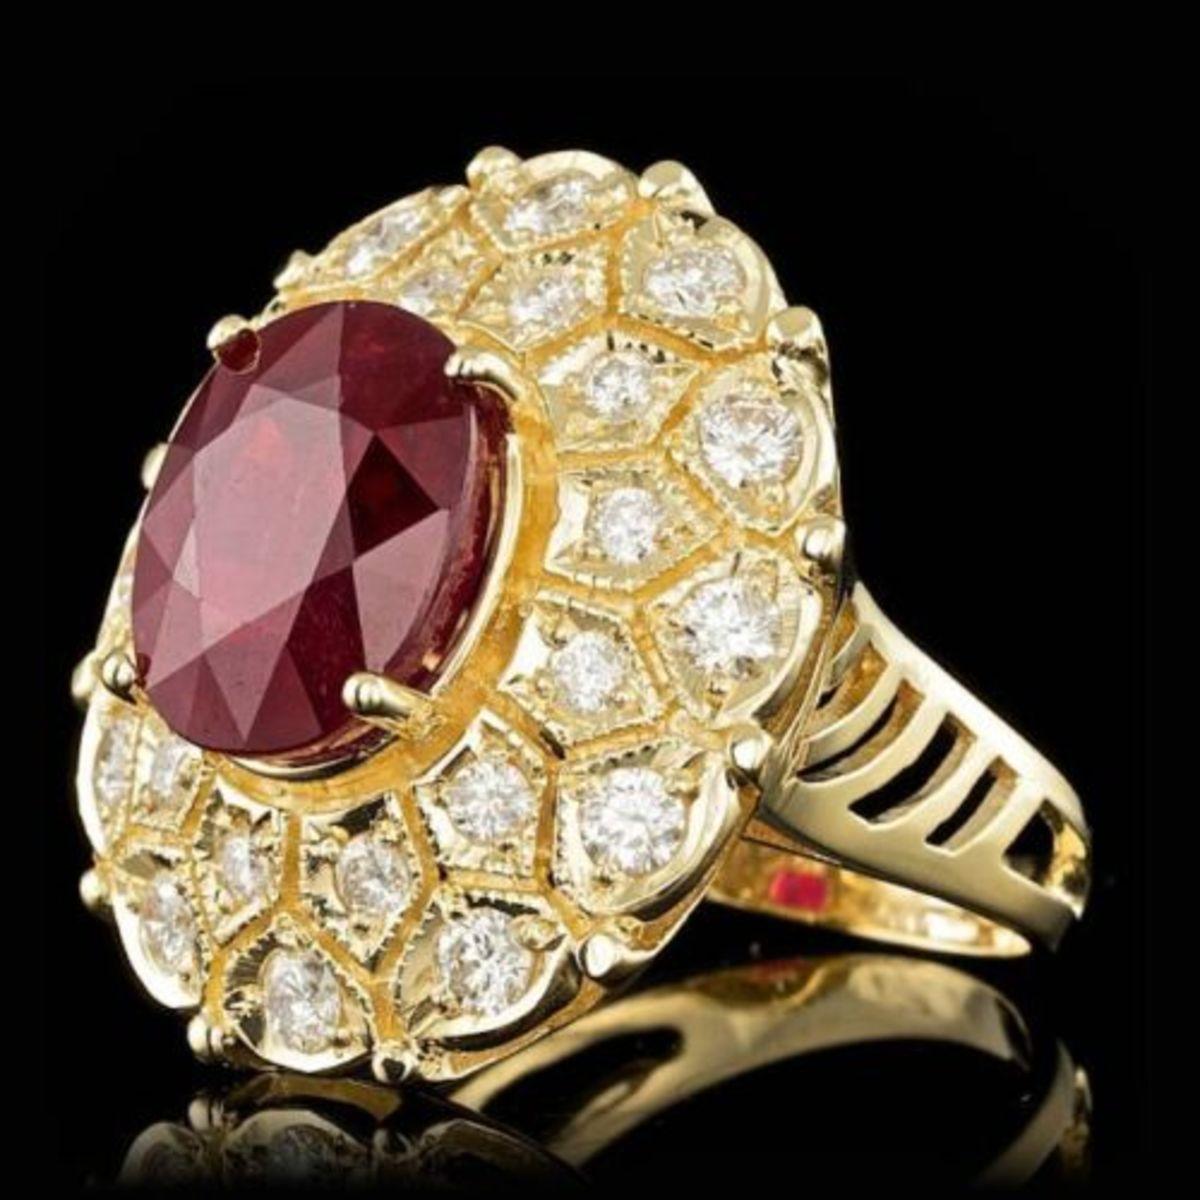 14K Yellow Gold 8.87ct Ruby and 1.67ct Diamond Ring